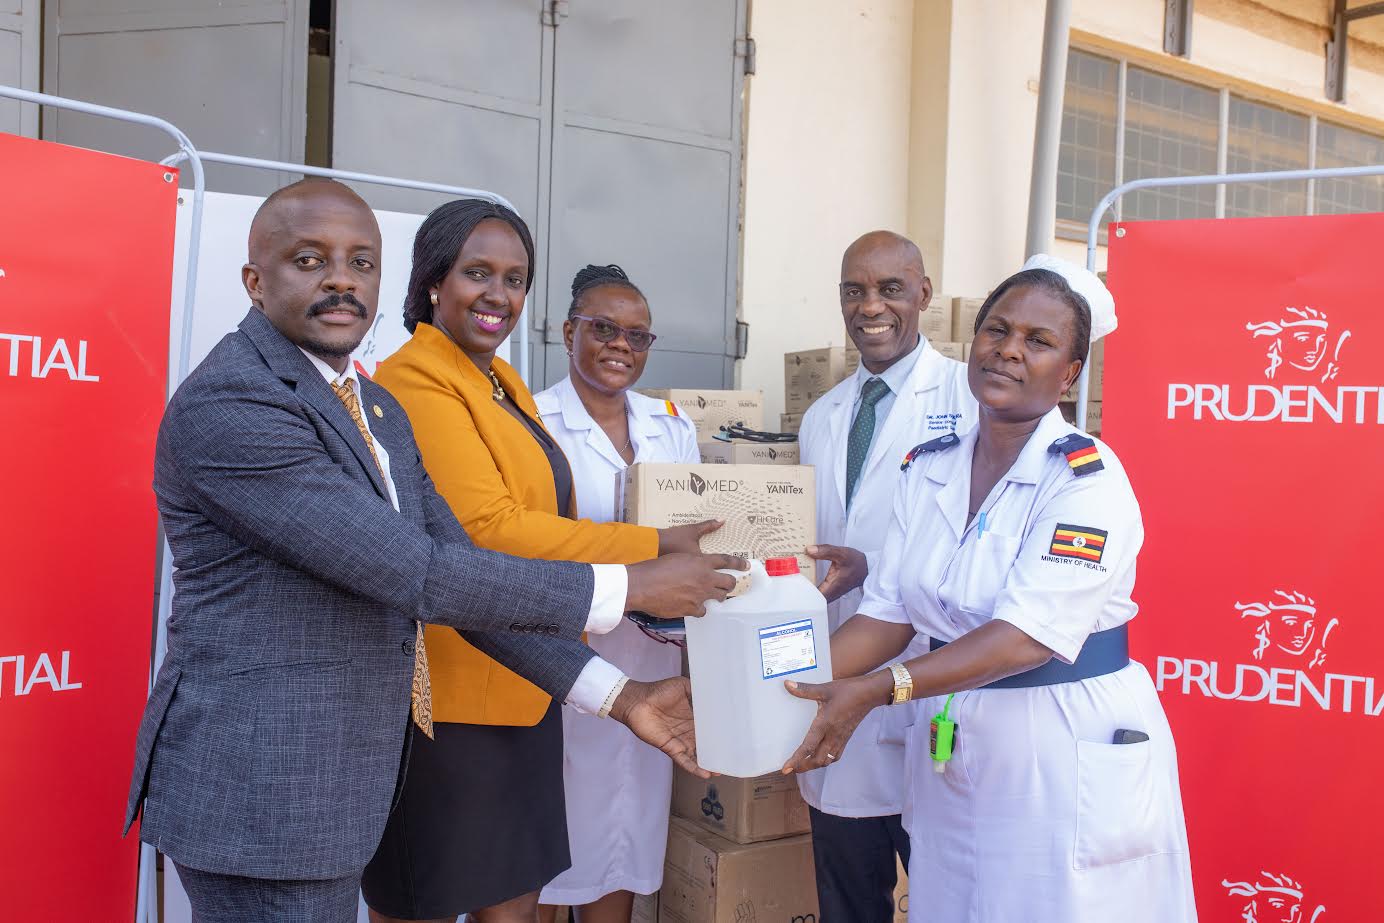 Prudential donates over shs100m worth of essential medical supplies to Mulago